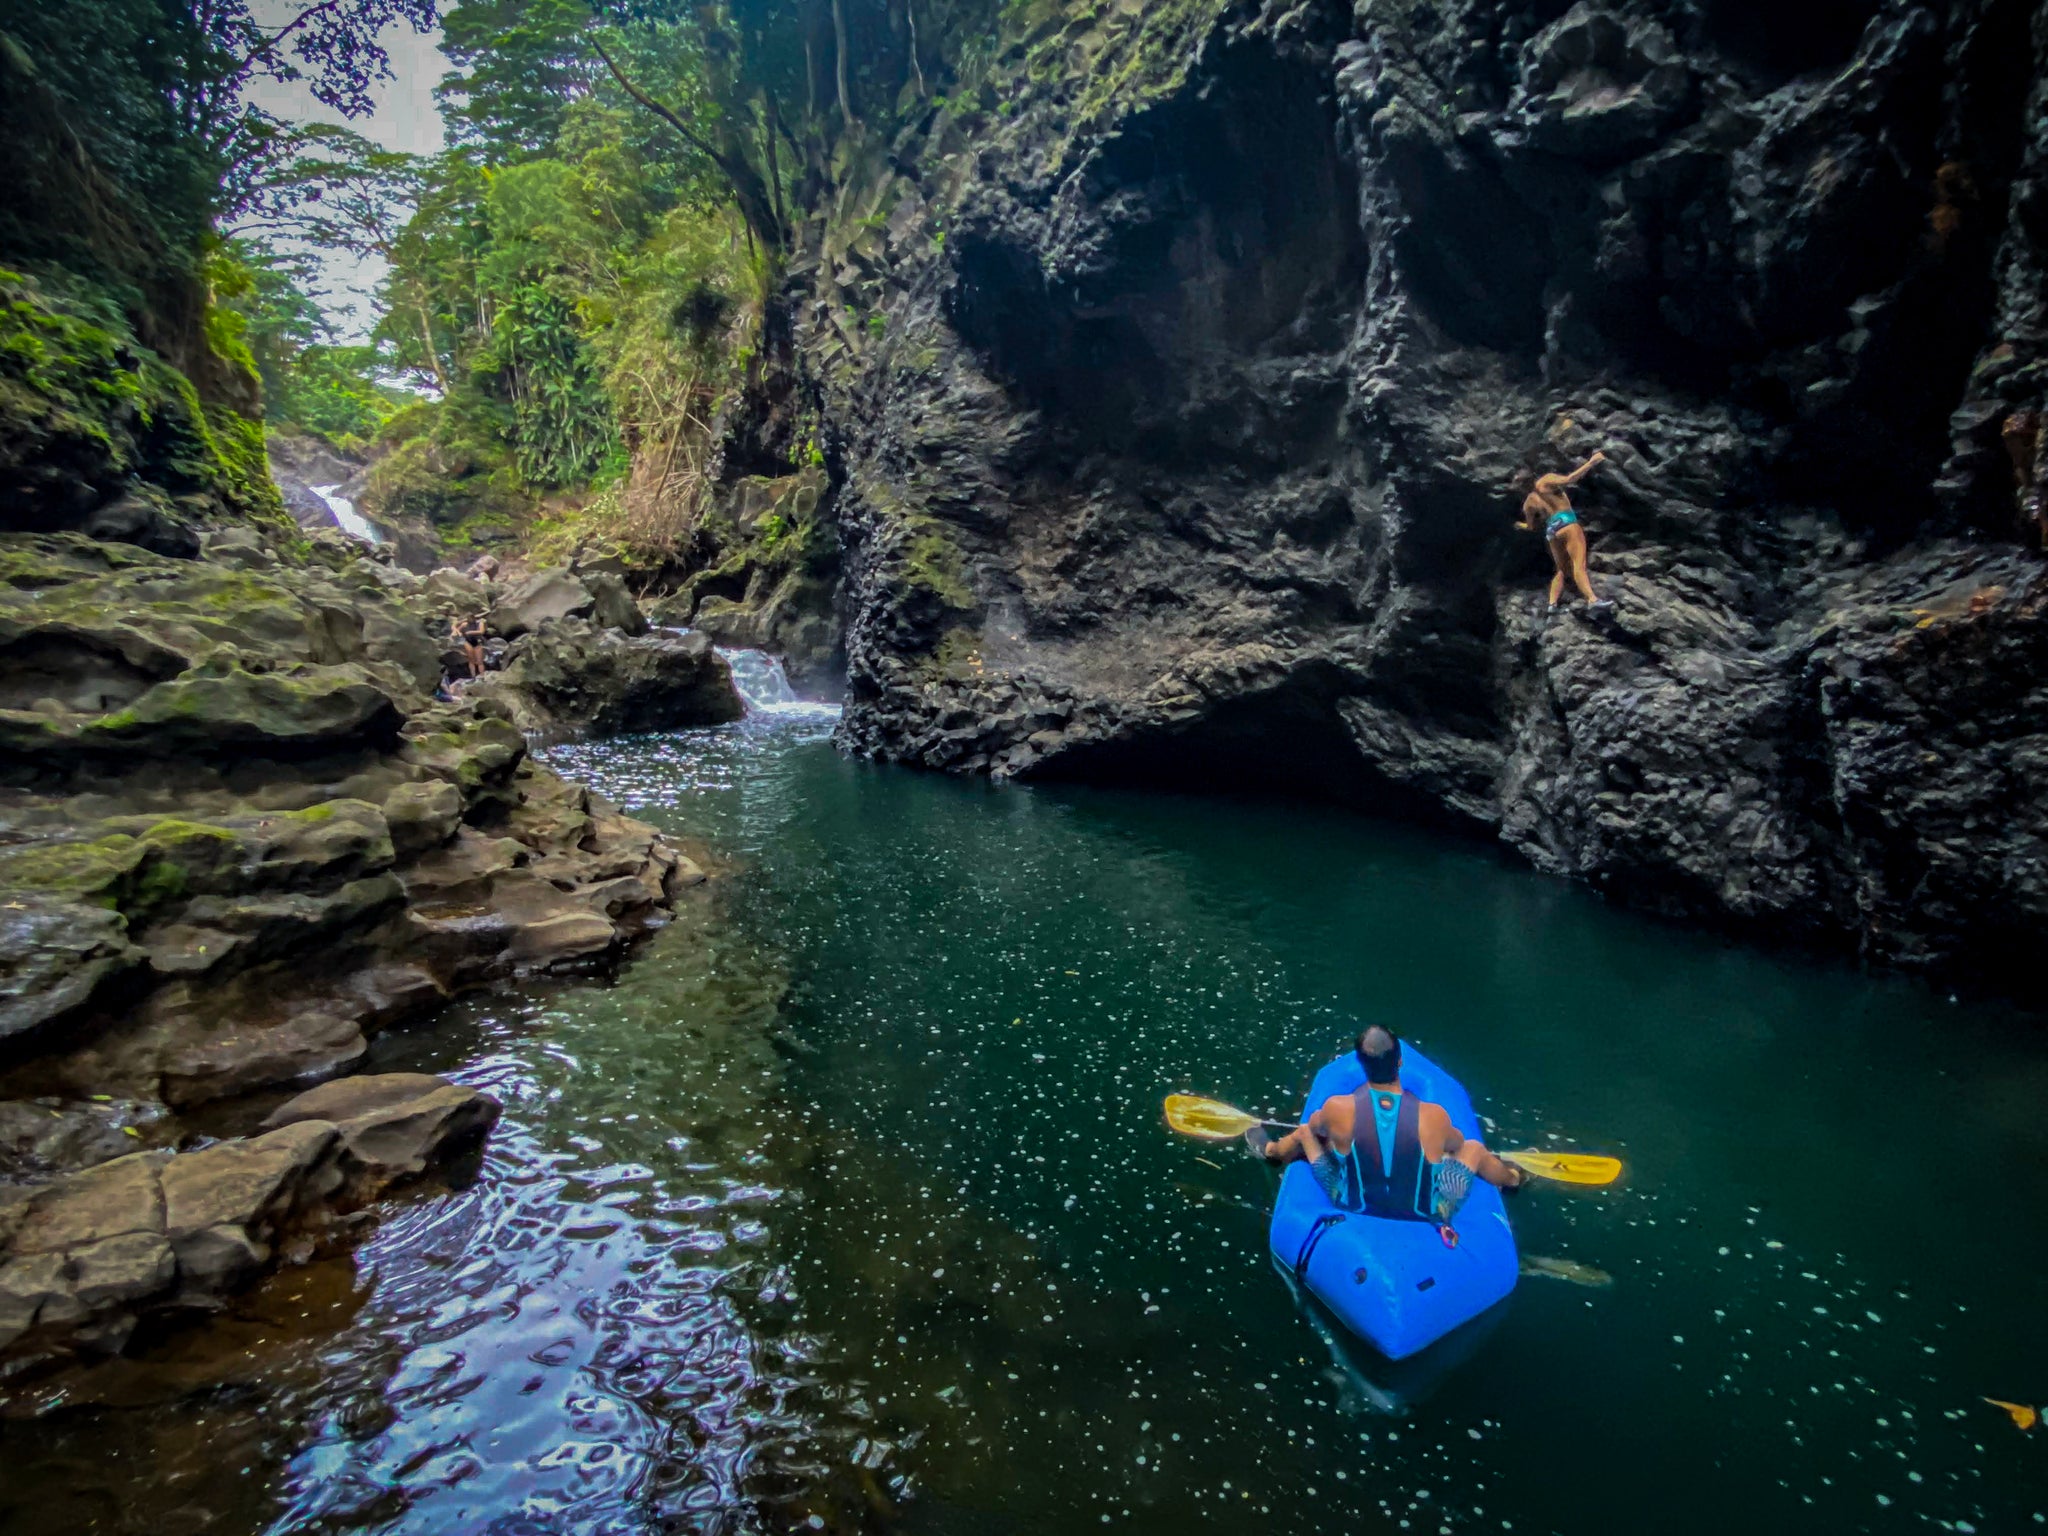 Packrafting in hawaii and rock climbing above the water